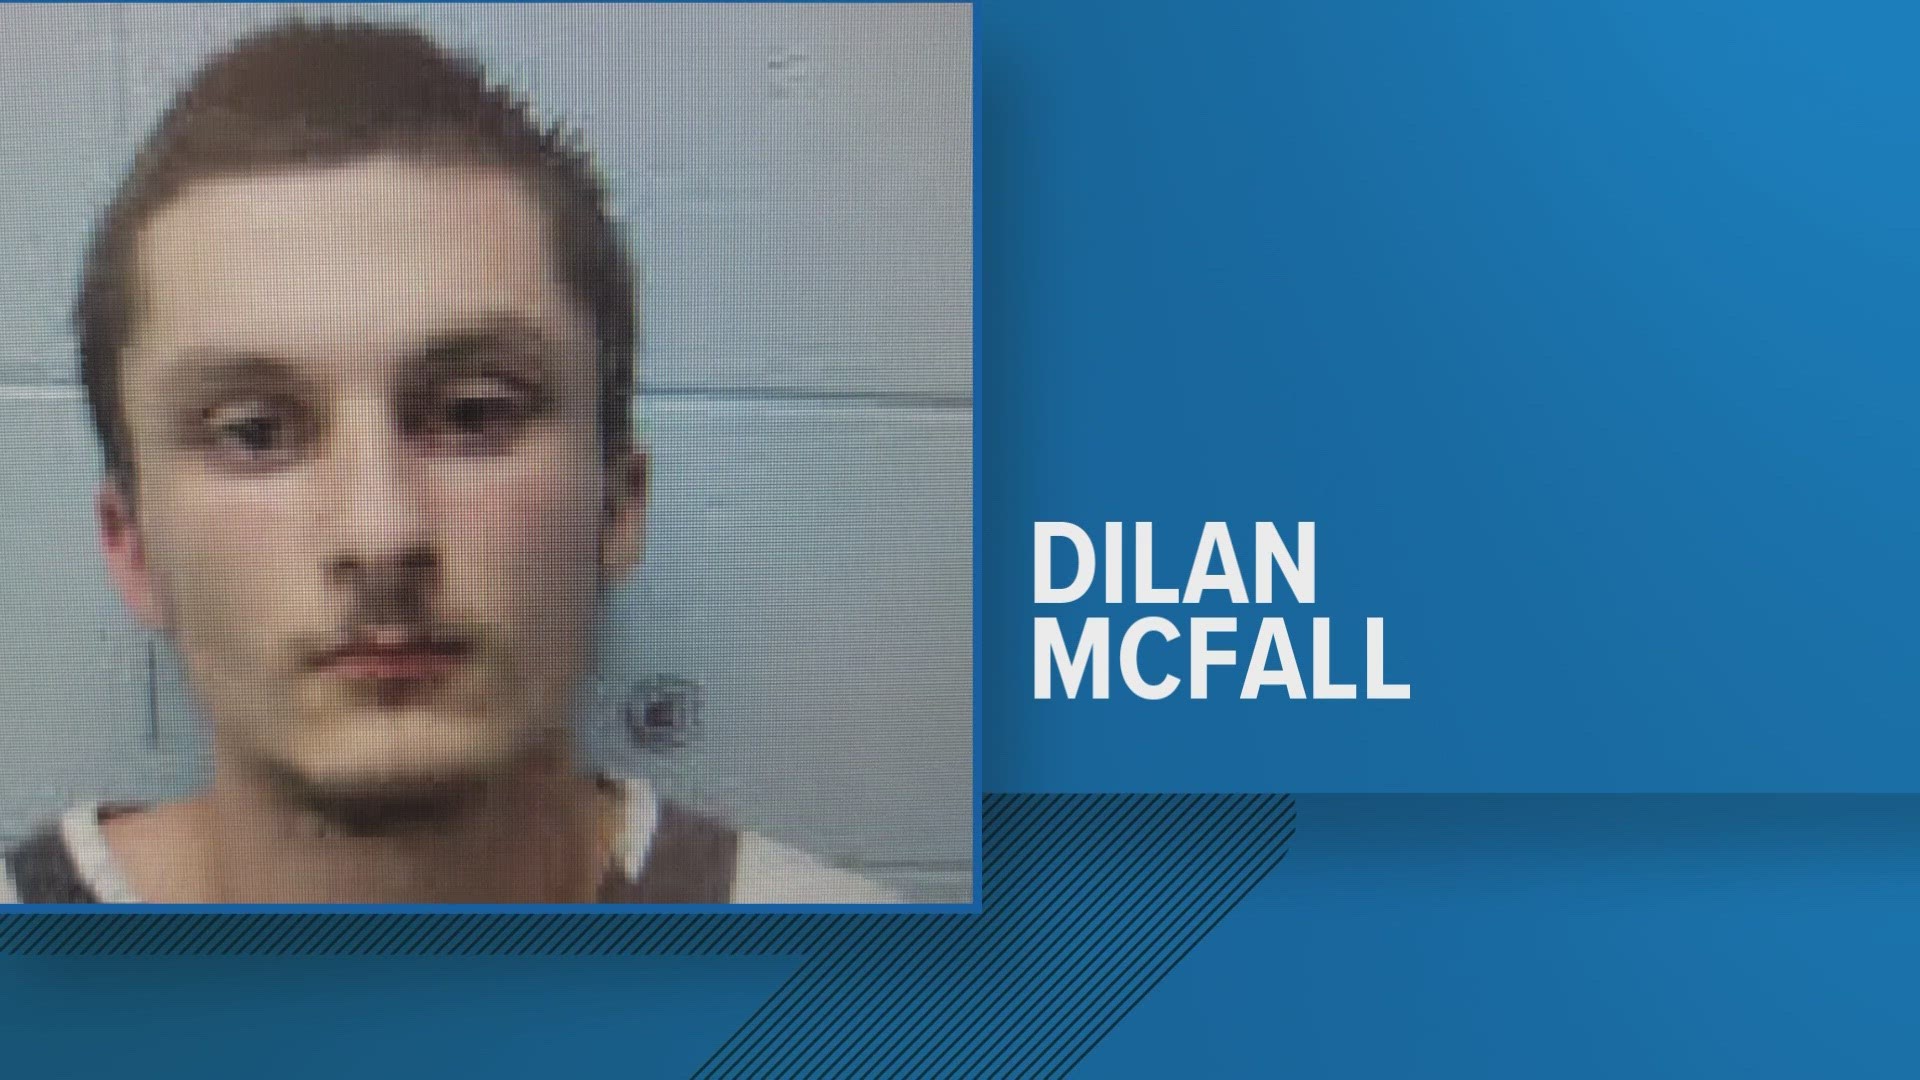 The sheriff tells us 21-year-old Dilan McFall shot the mother of his child multiple times.